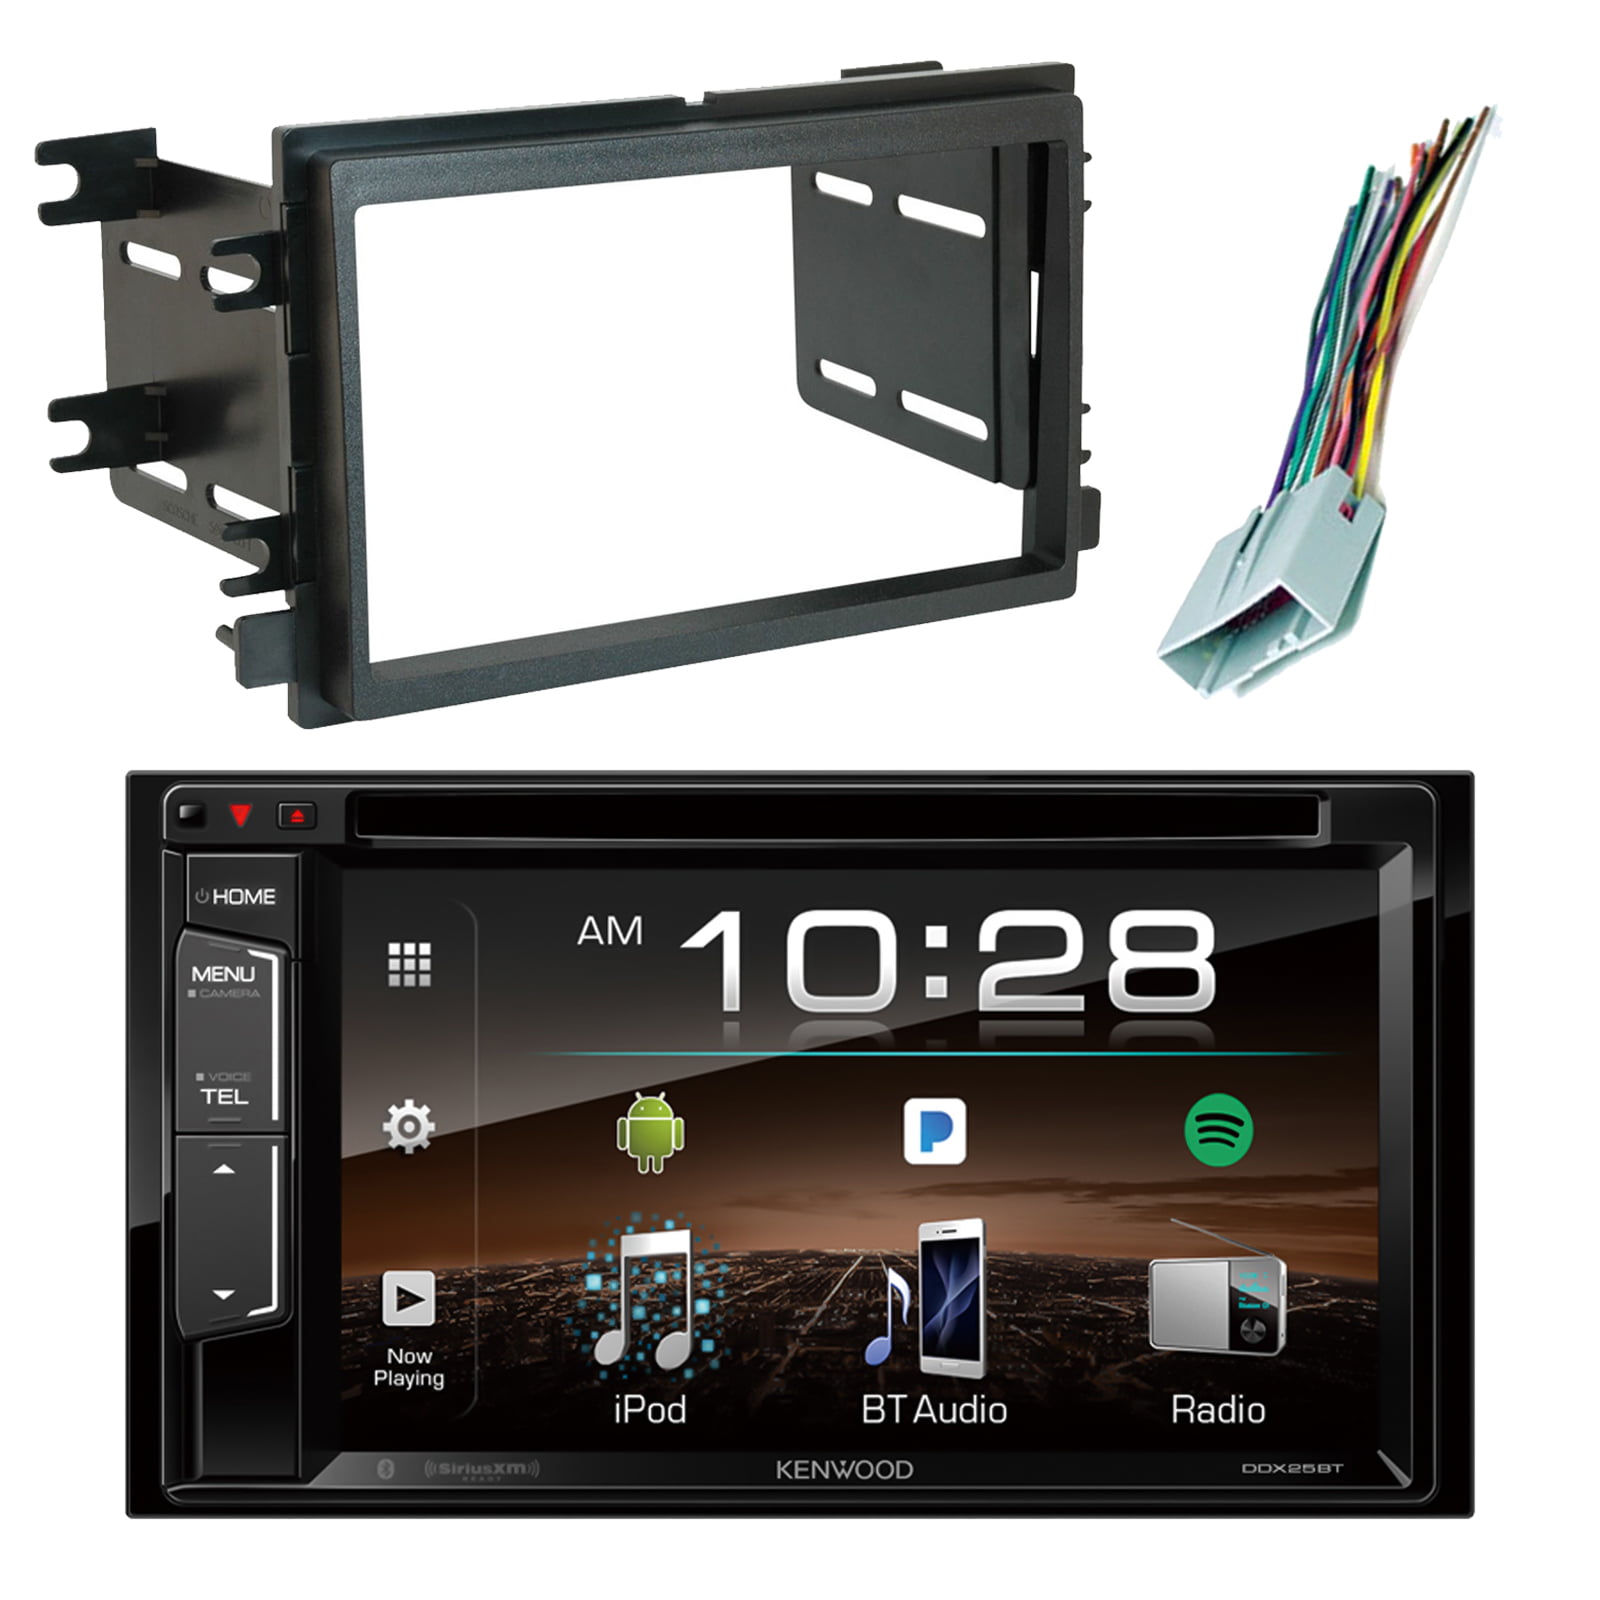 Kenwood Car Stereo Dvd Wiring Diagram from i5.walmartimages.com